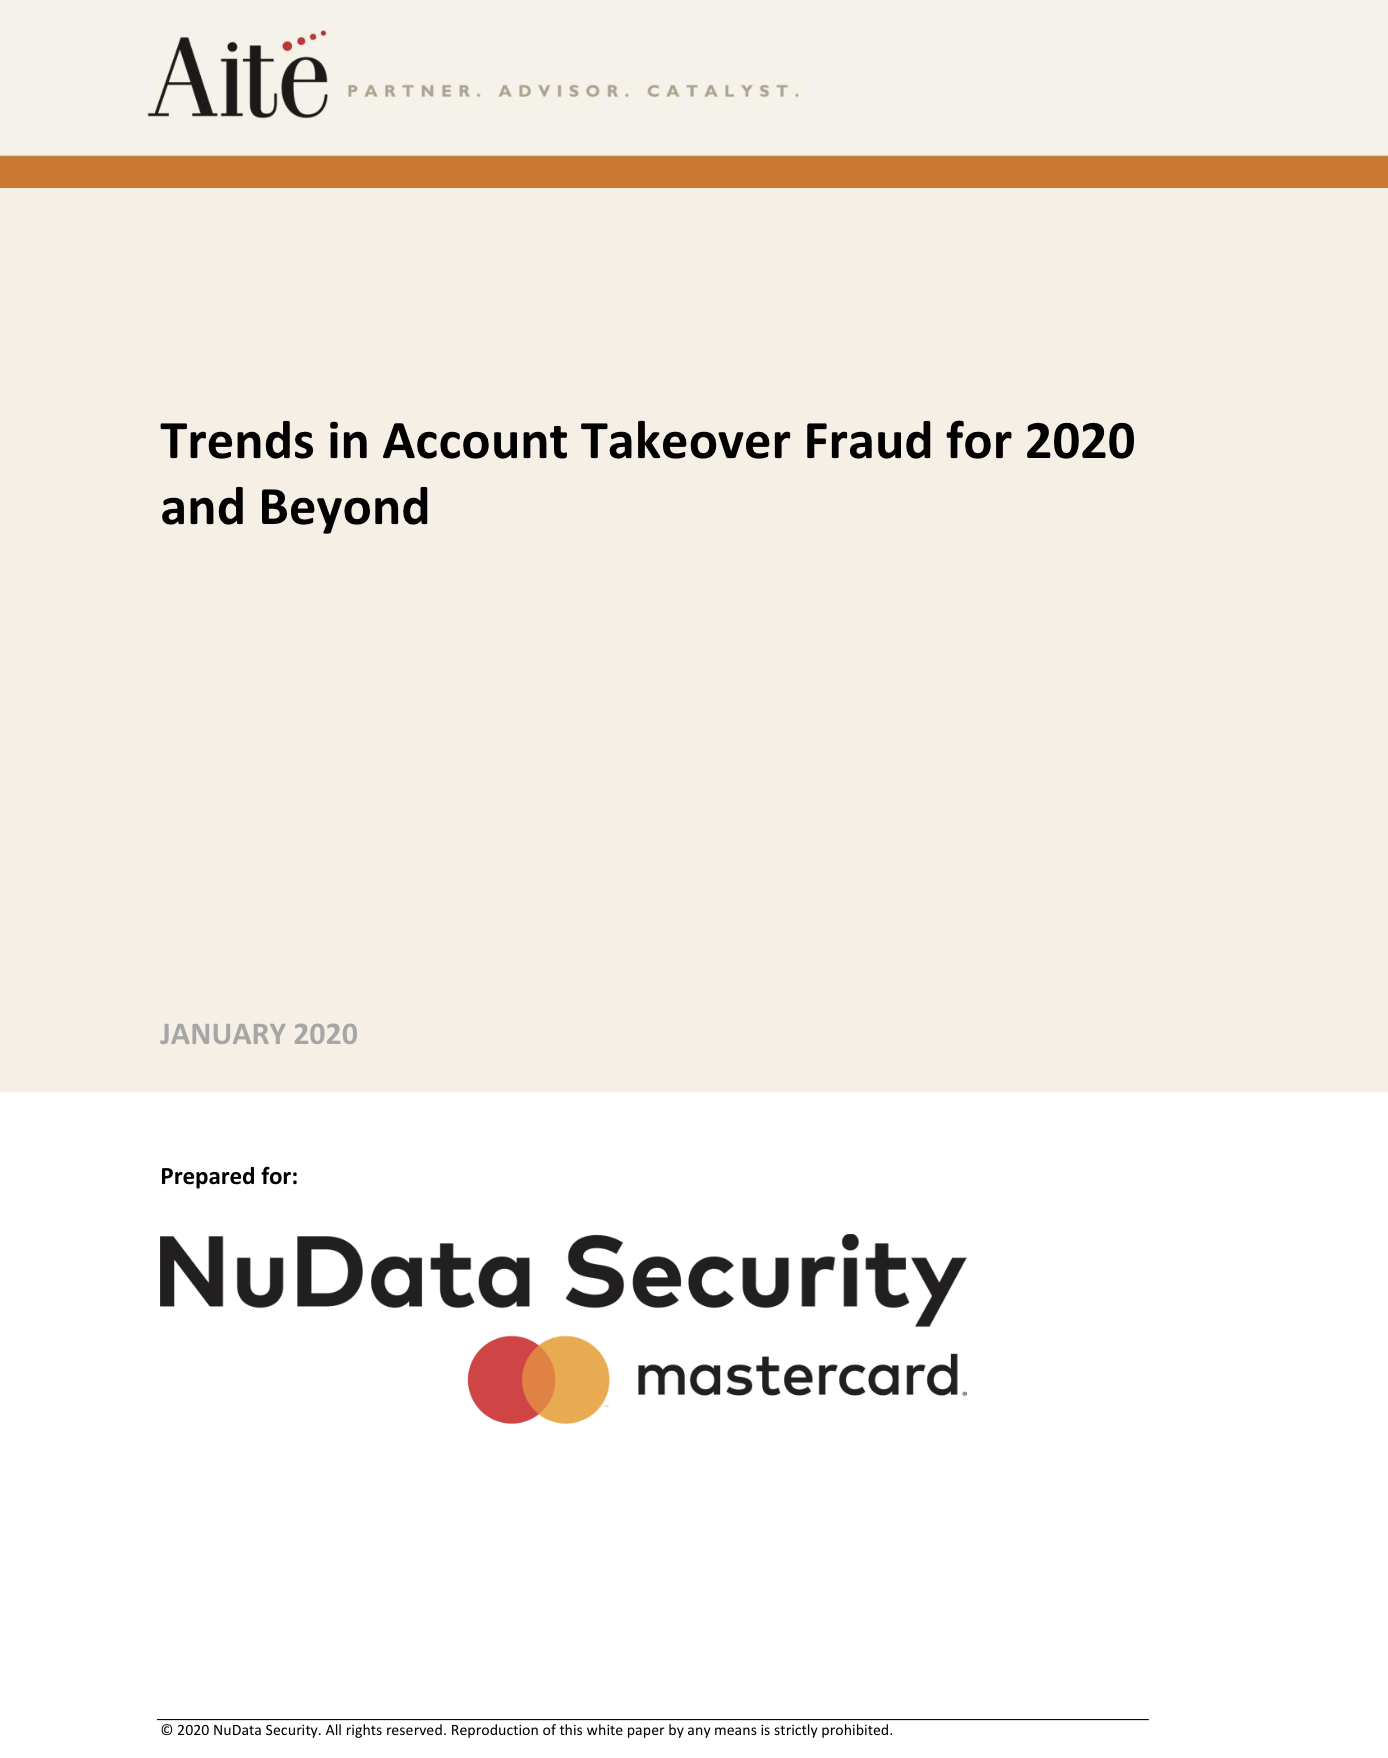 Trends in Account Takeover Fraud for 2020 and Beyond